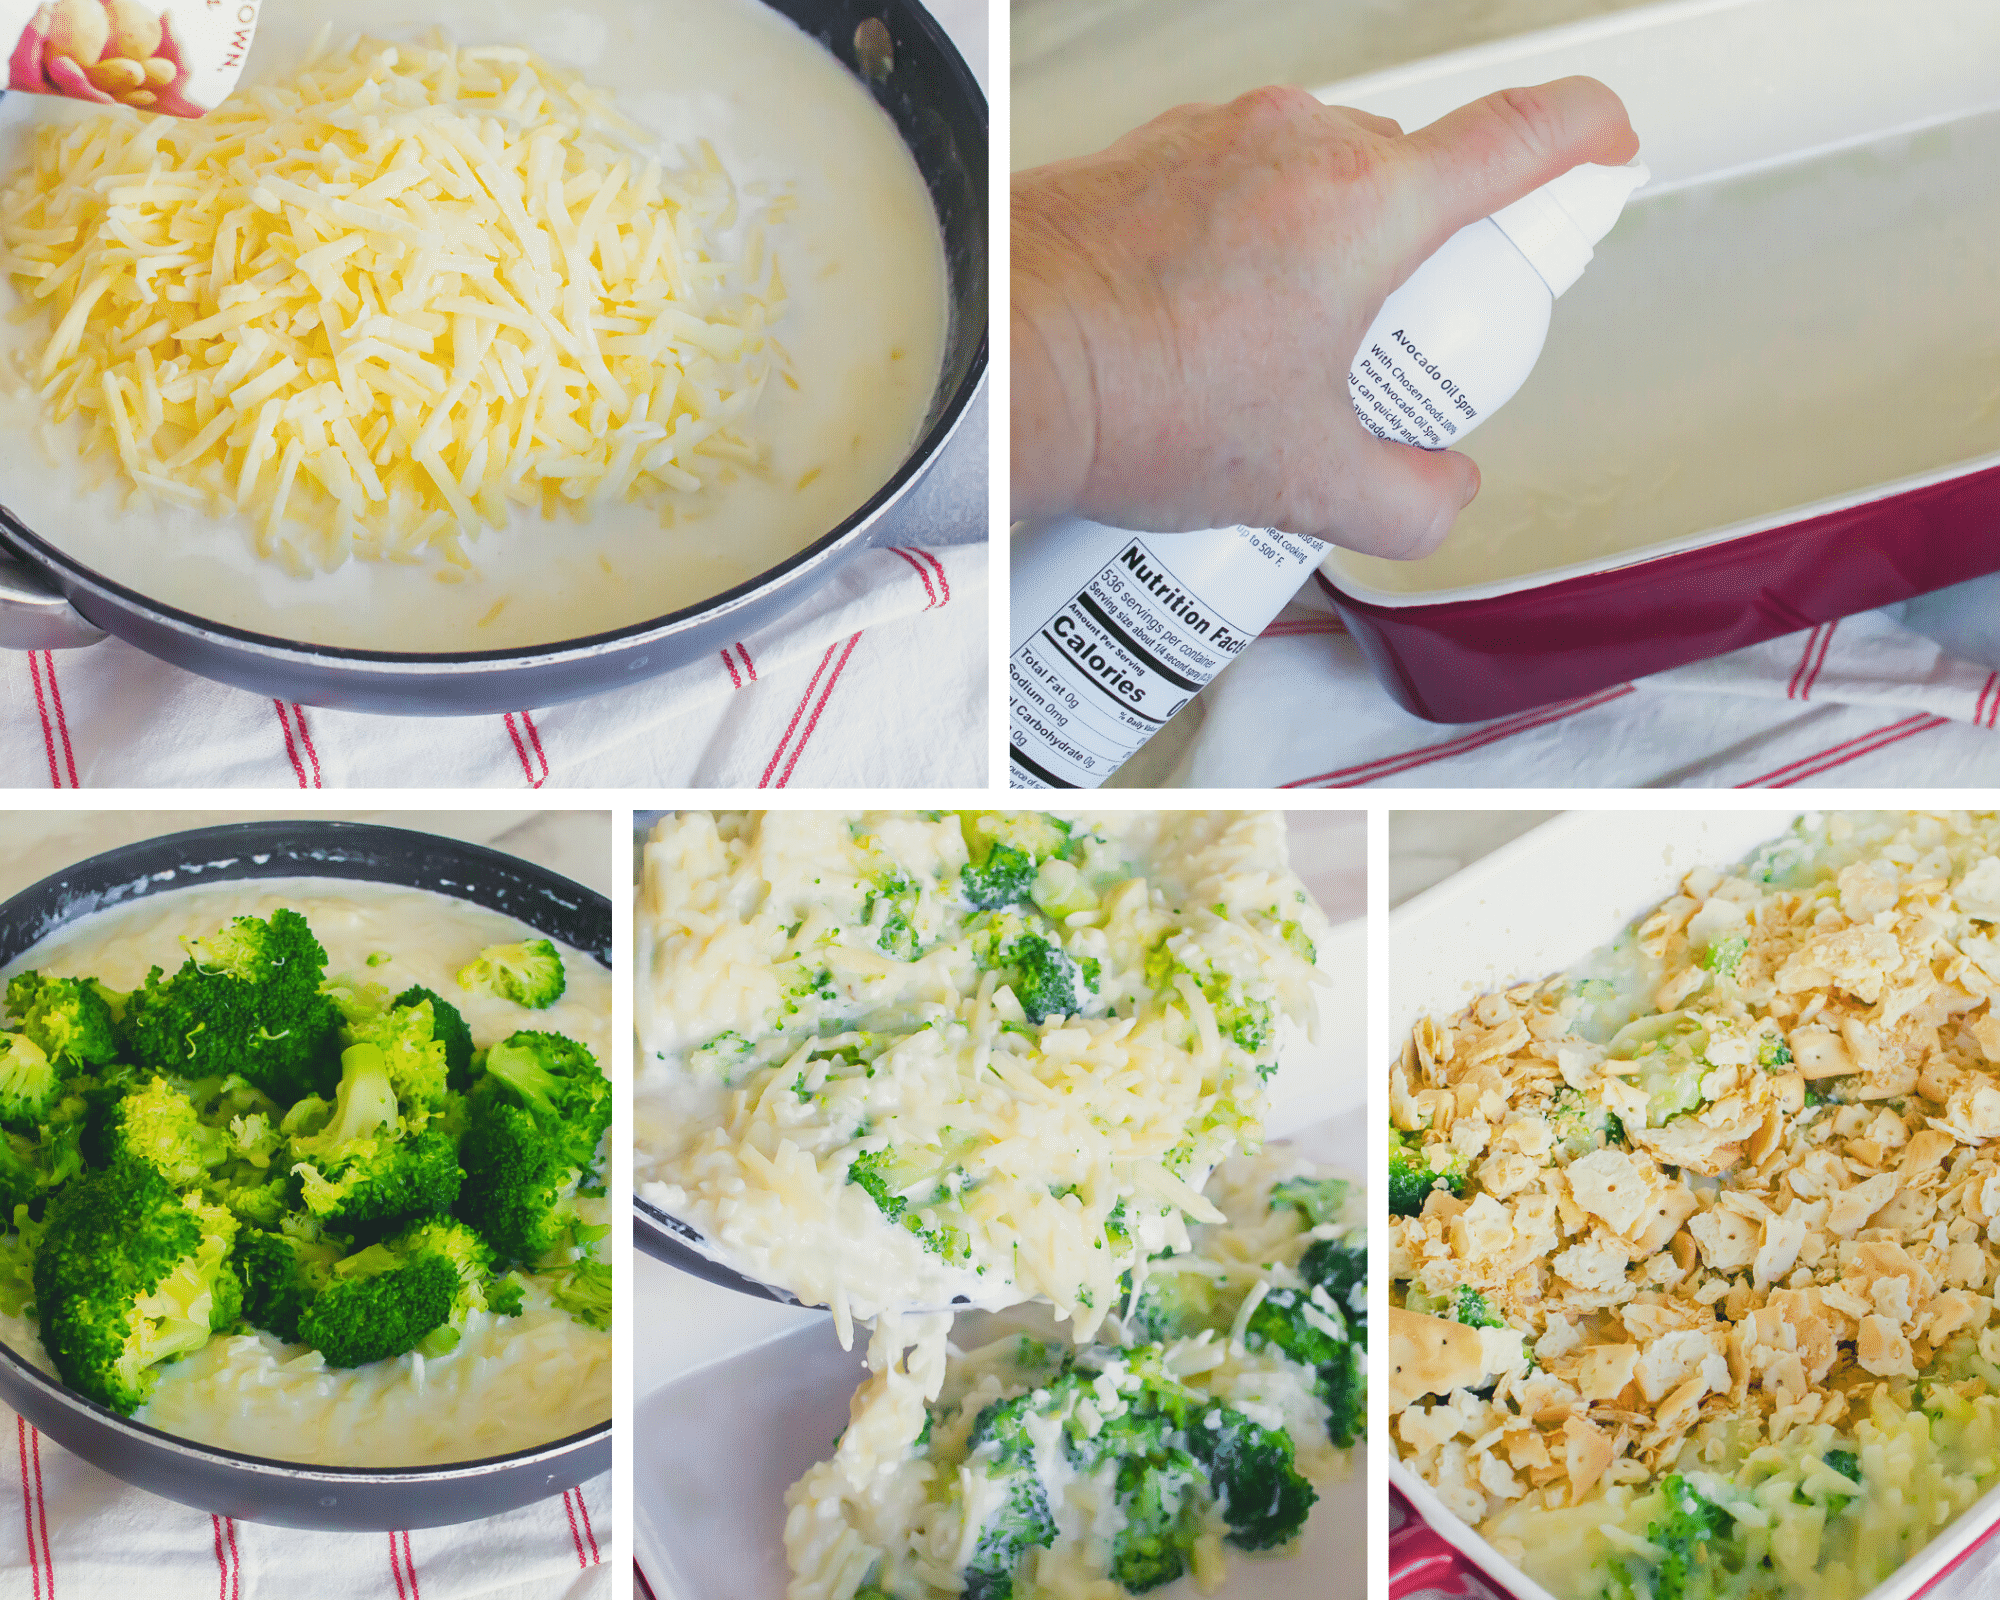 final 5 steps shown in picture for easy broccoli casserole